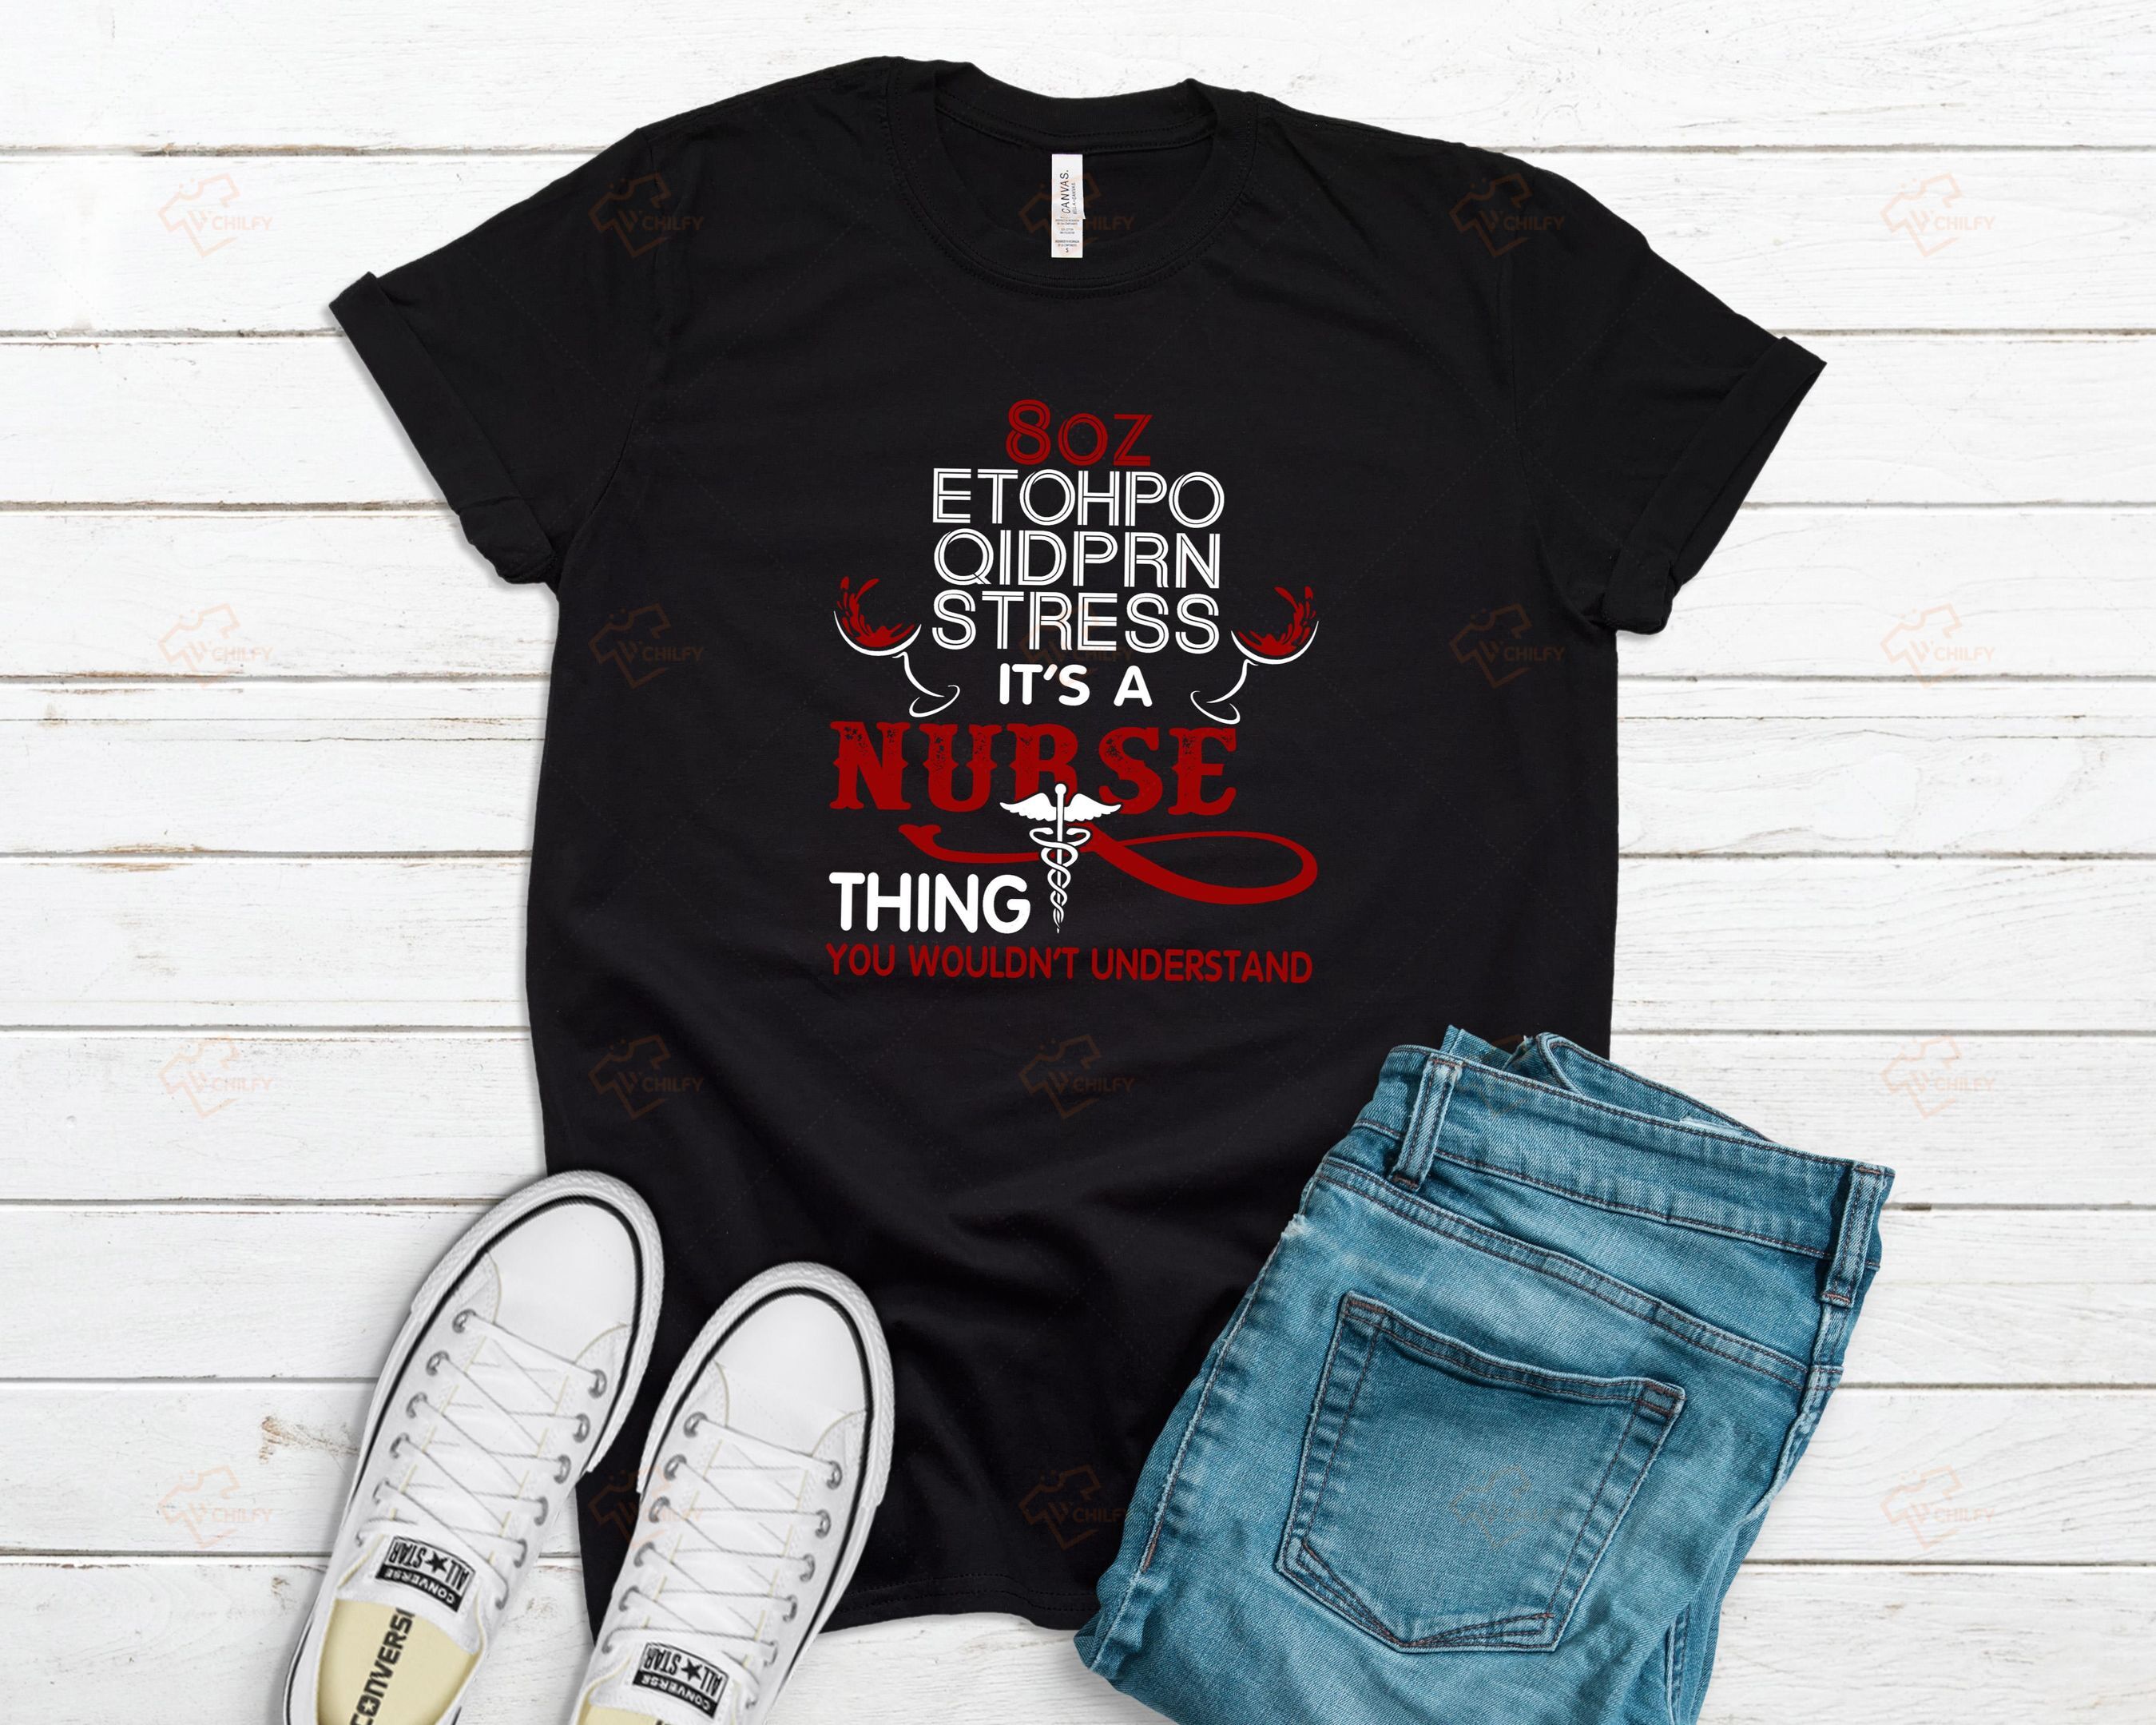 A Nurse Thing You Wouldn’t Understand Shirt, Christian Nurse Shirt, Nurse With God Shirt, Nurse Gift